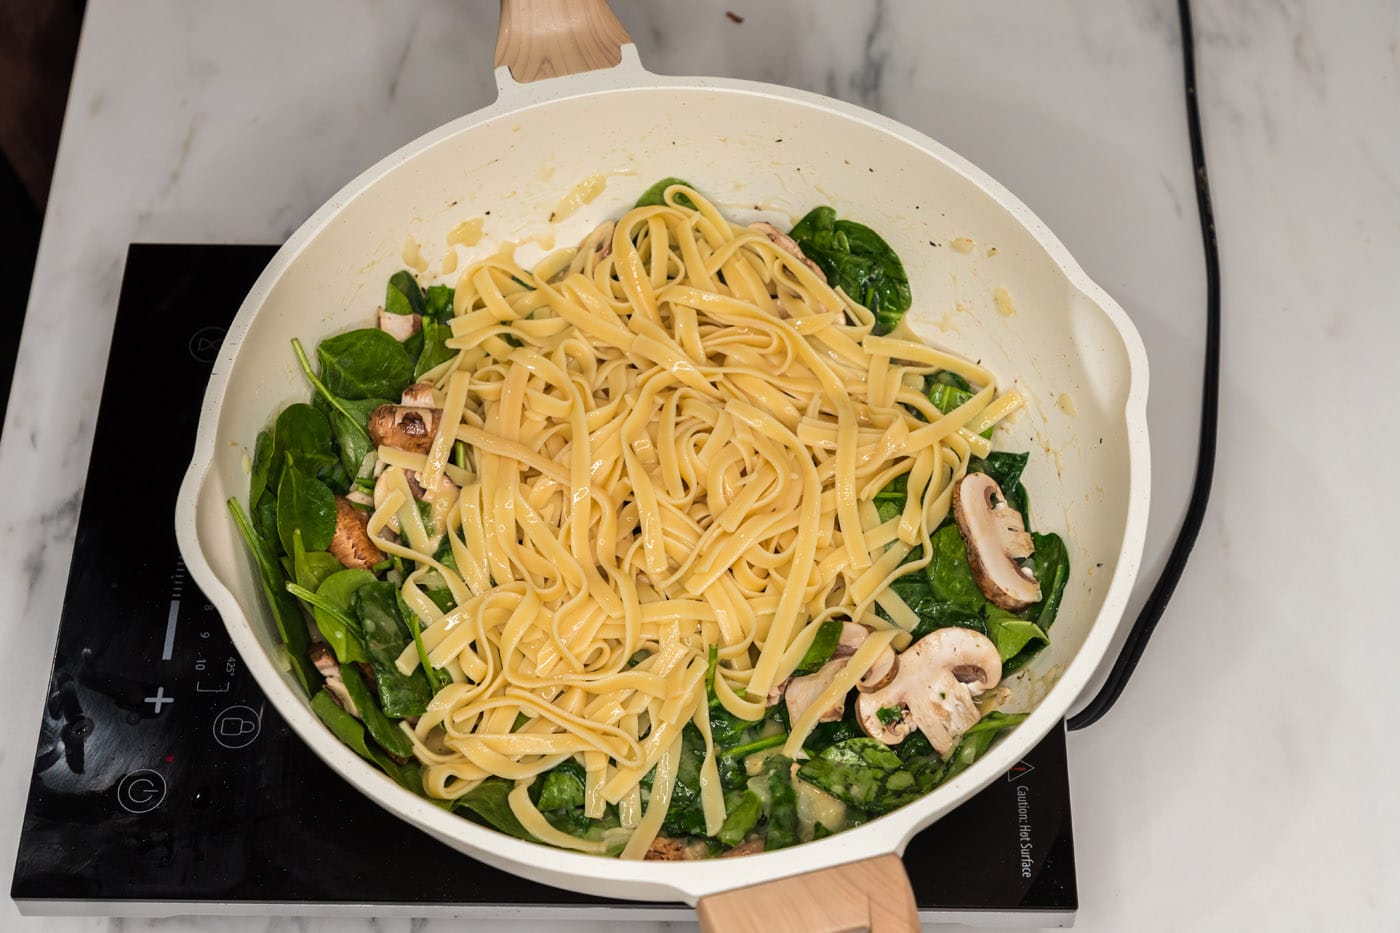 fettuccine noodles added to spinach and mushroom mixture in a skillet